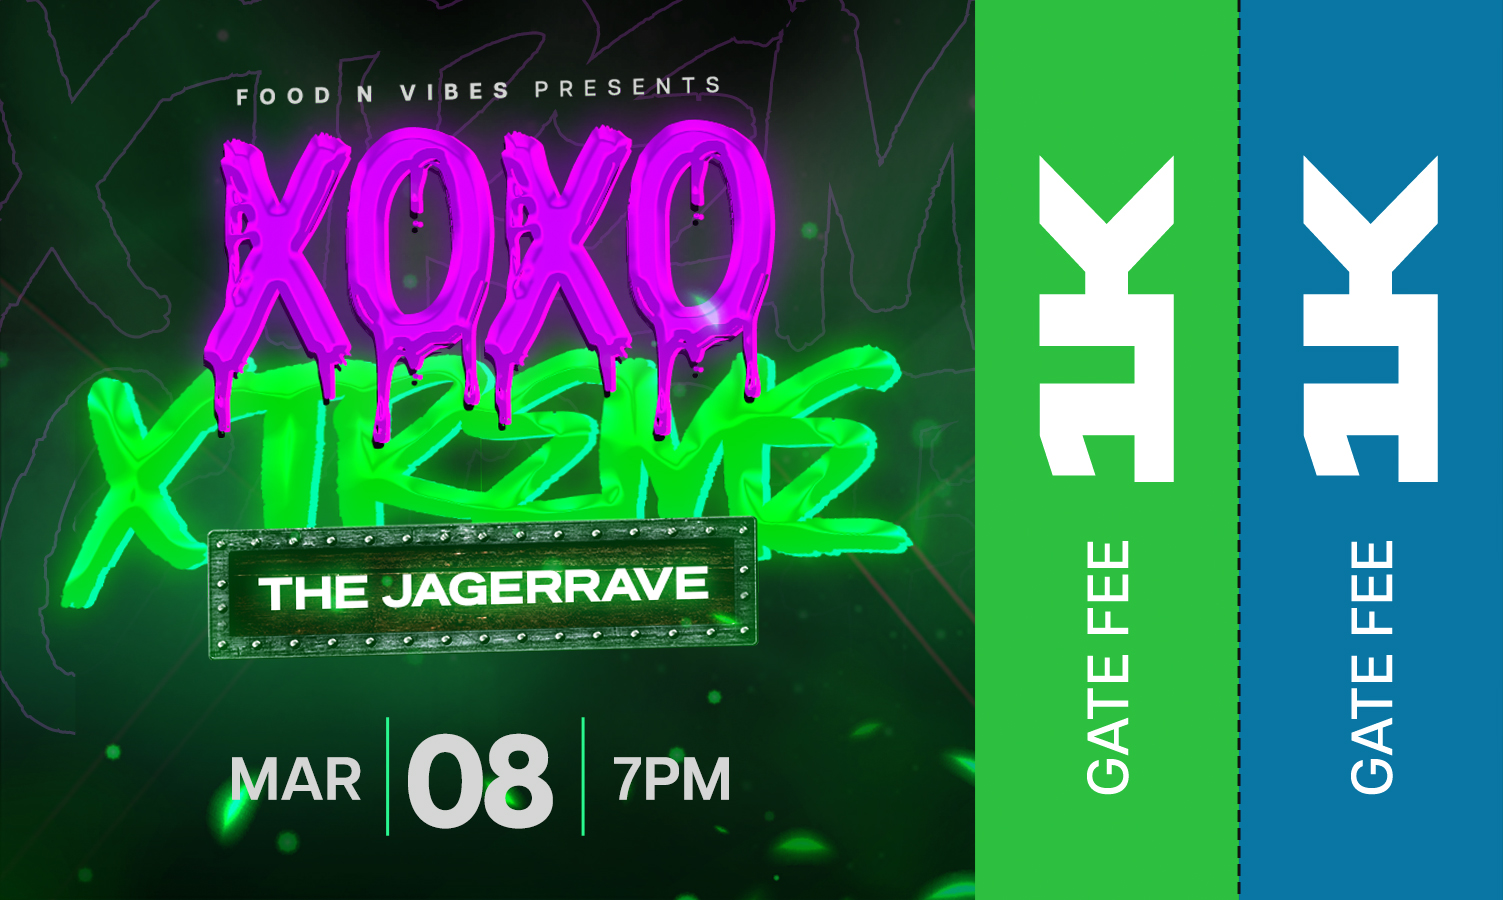 XoXo Xtreme - The Jagerrave